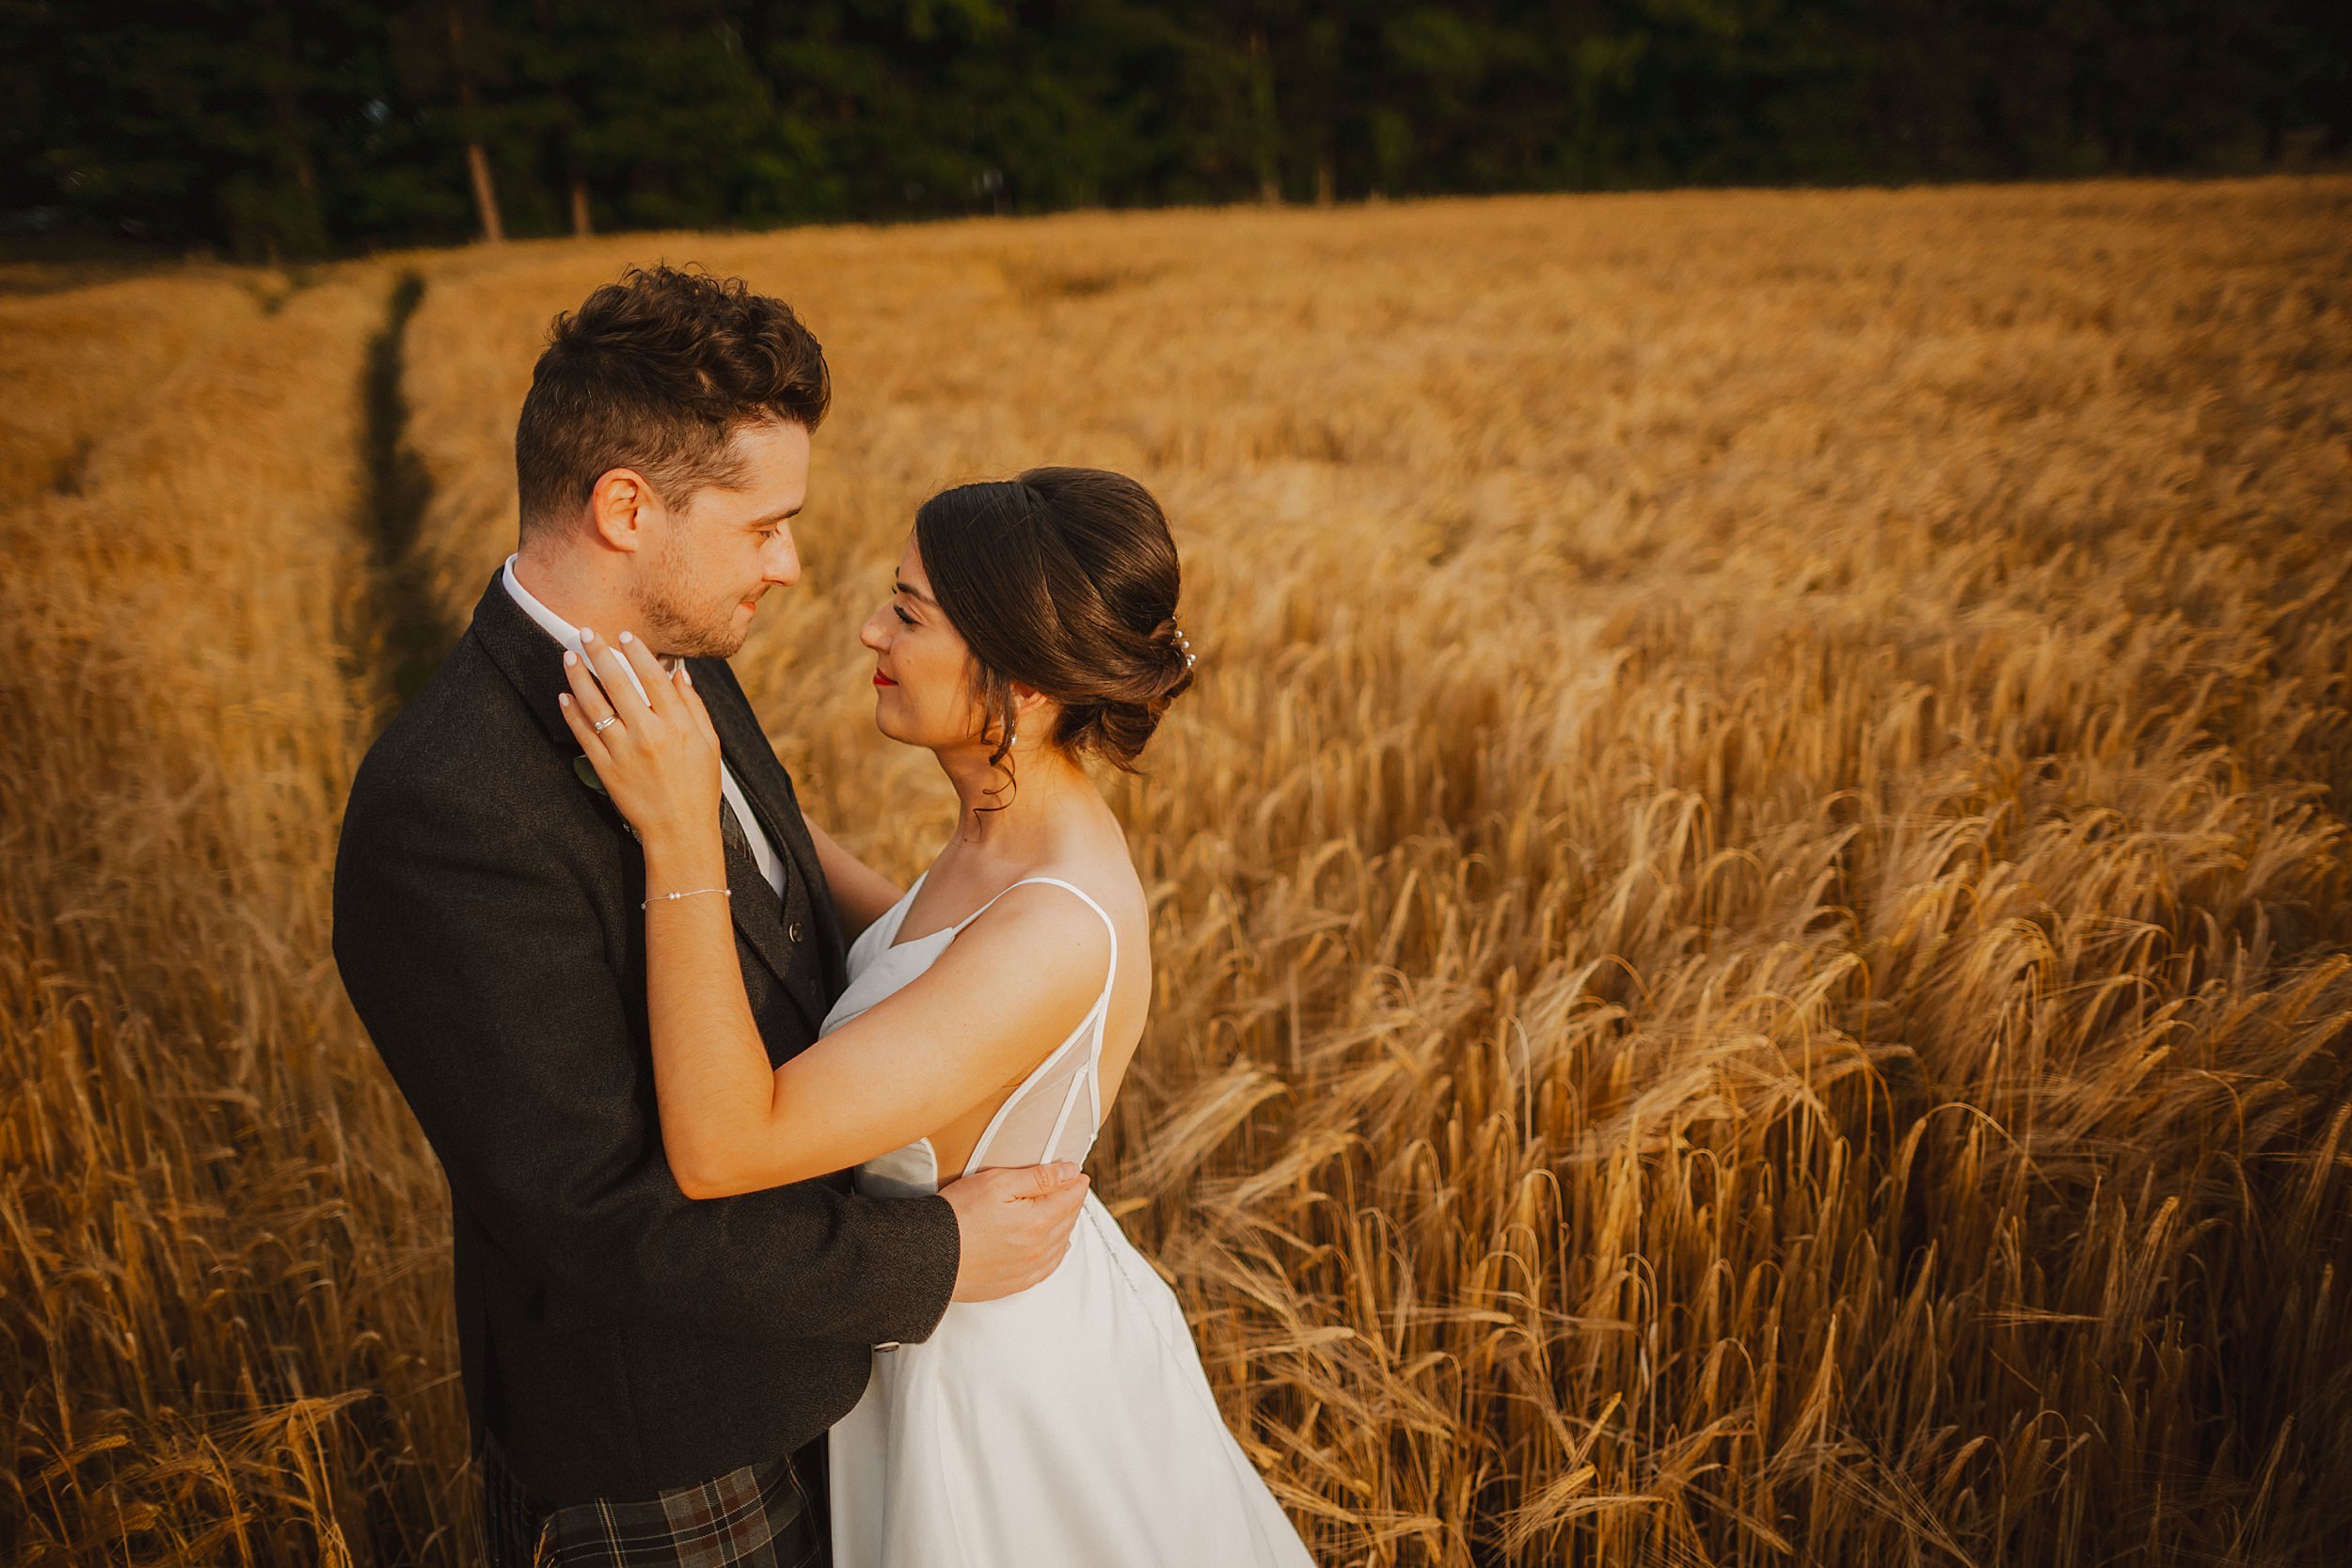 Wedding couple share a moment in a wheat field at Enterkine House Hotel on their wedding day